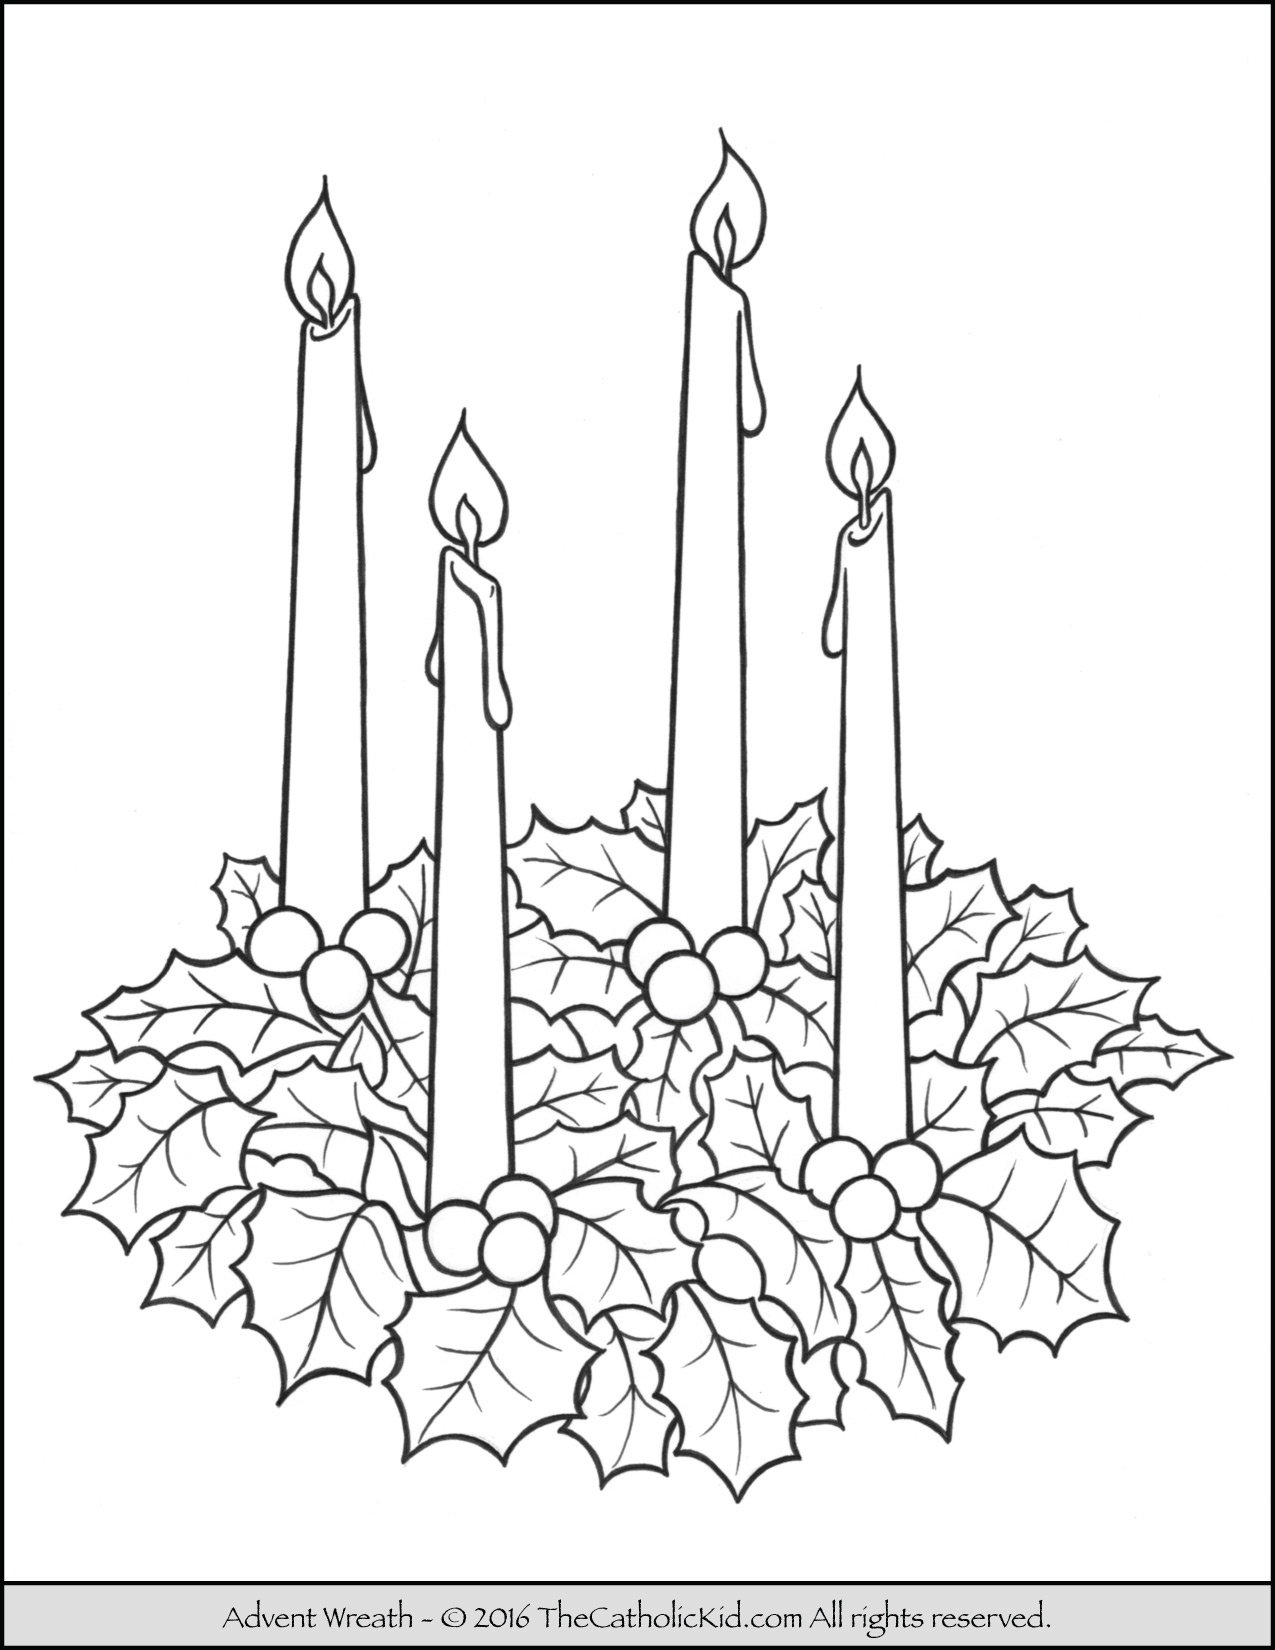 advent-wreath-coloring-page-free-printable-advent-wreath-free-printable